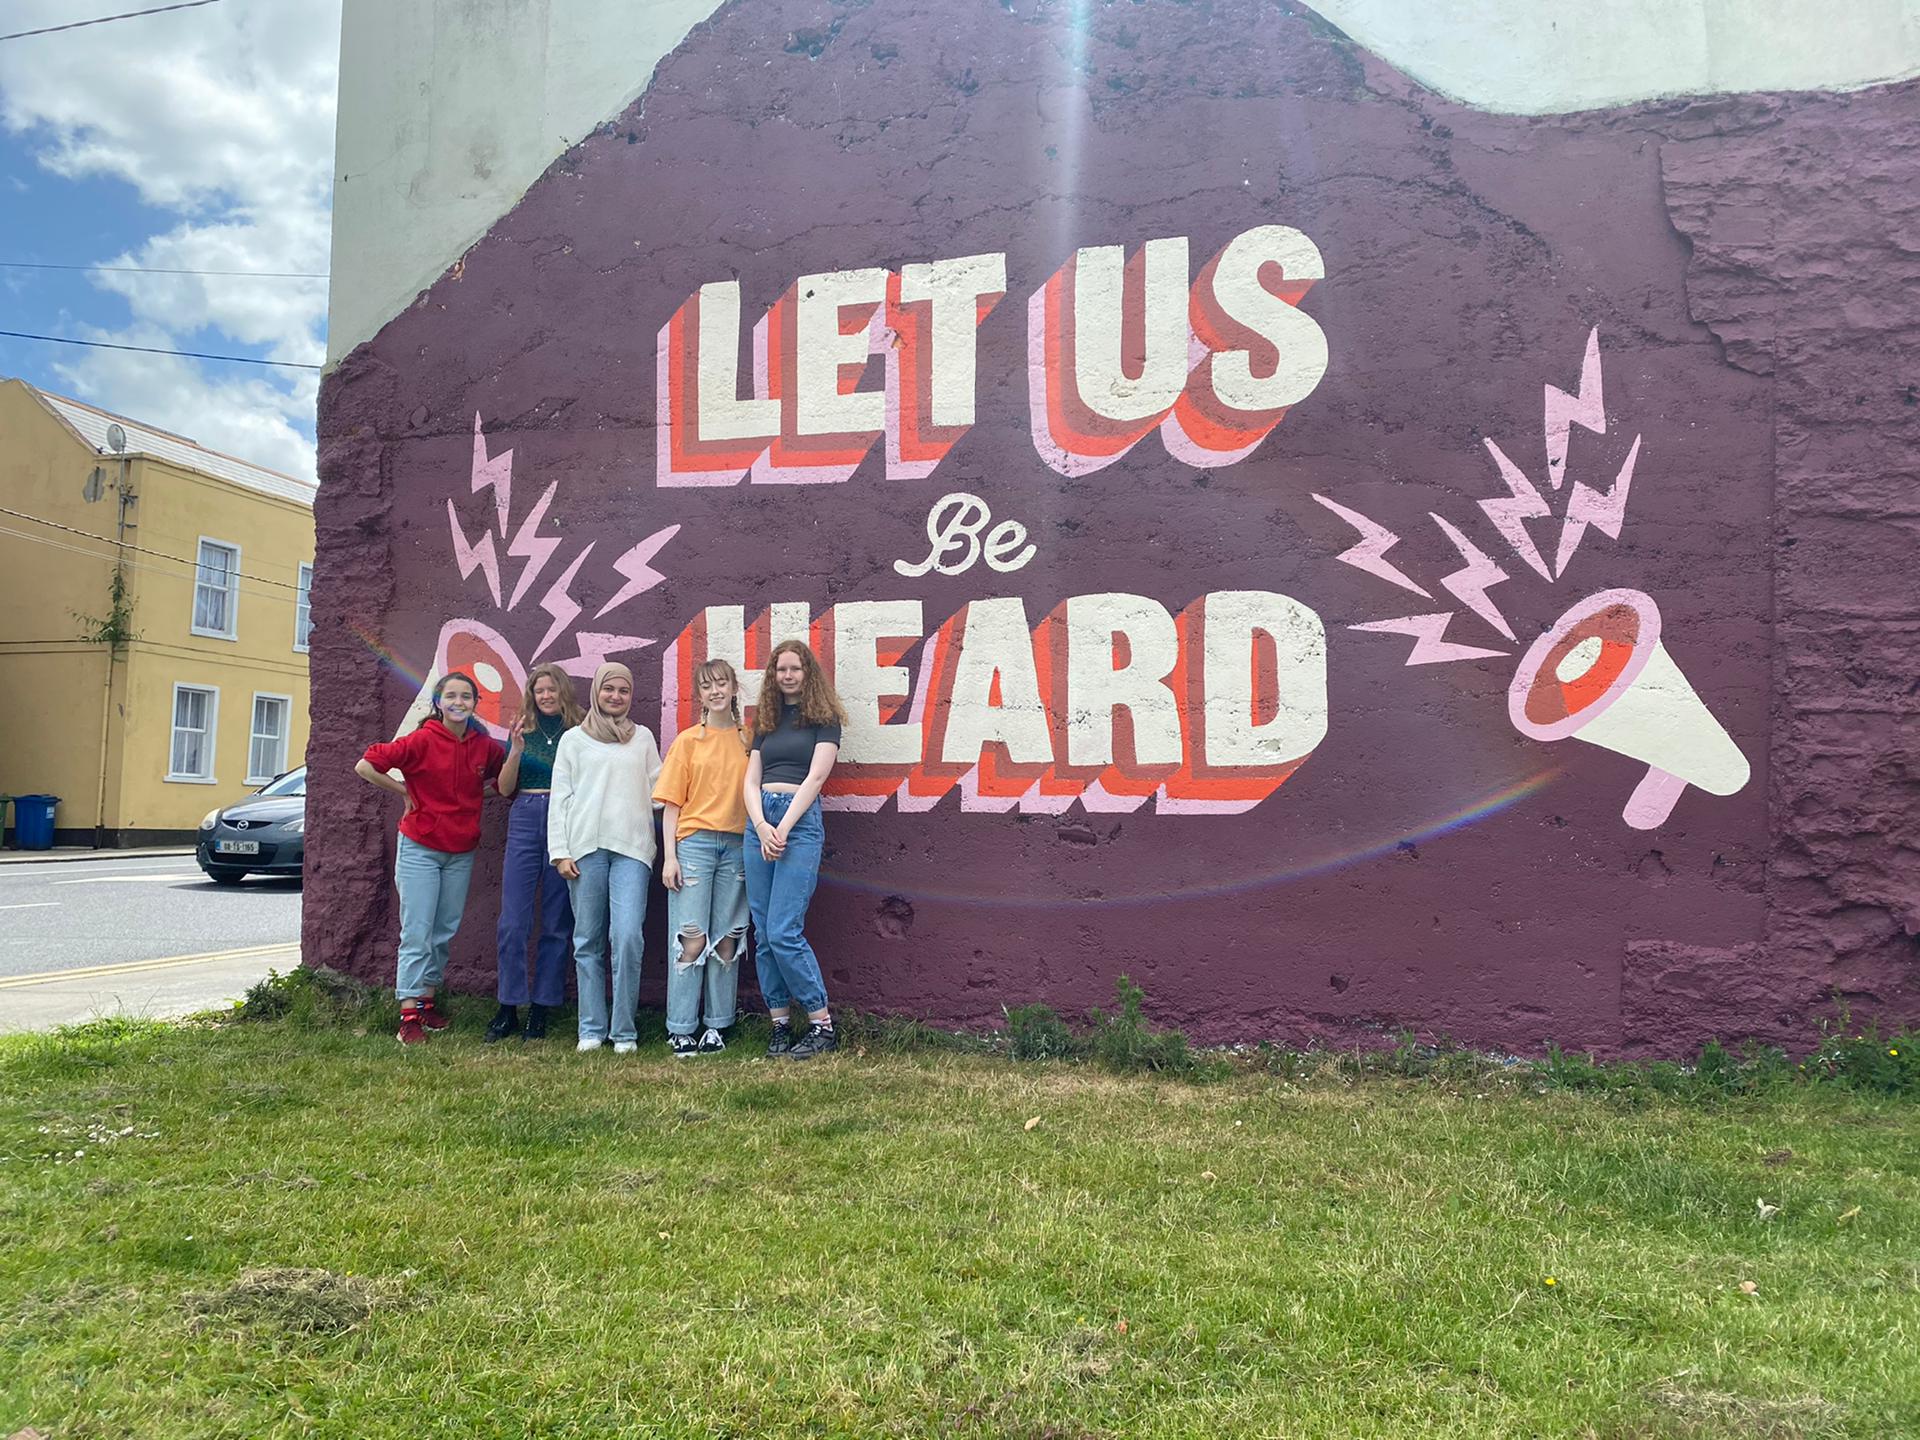 Comhairle na nÓg AGM 2022 - Let Us Be Heard’ Members of Limerick Comhairle na nÓg pictured at their mural at Island Road, Limerick.